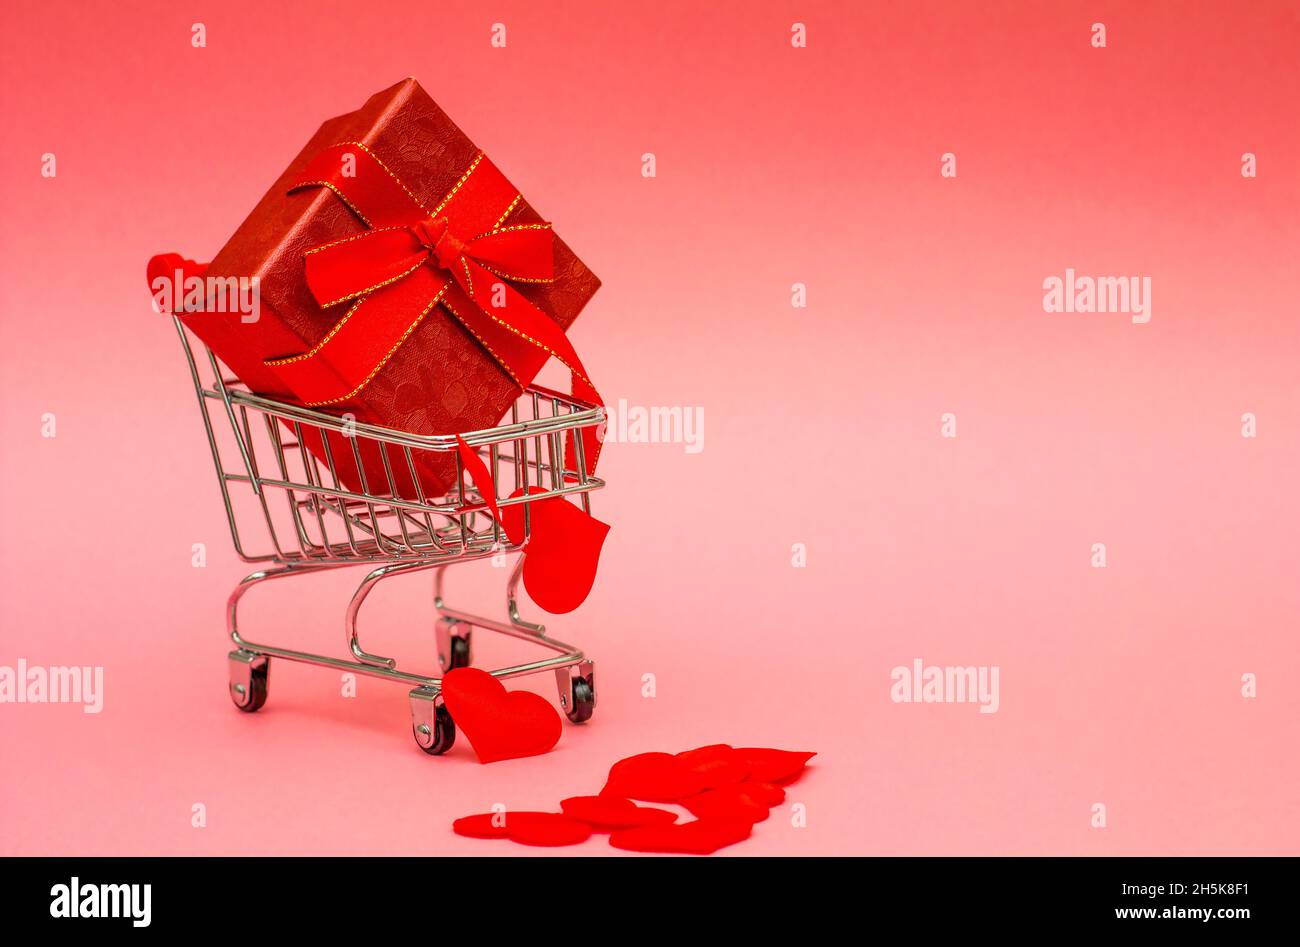 Gifts in a red box with a red ribbon, hearts and a bow. Creative concept with a shopping trolley with gifts, on a red background. place for your text. Stock Photo